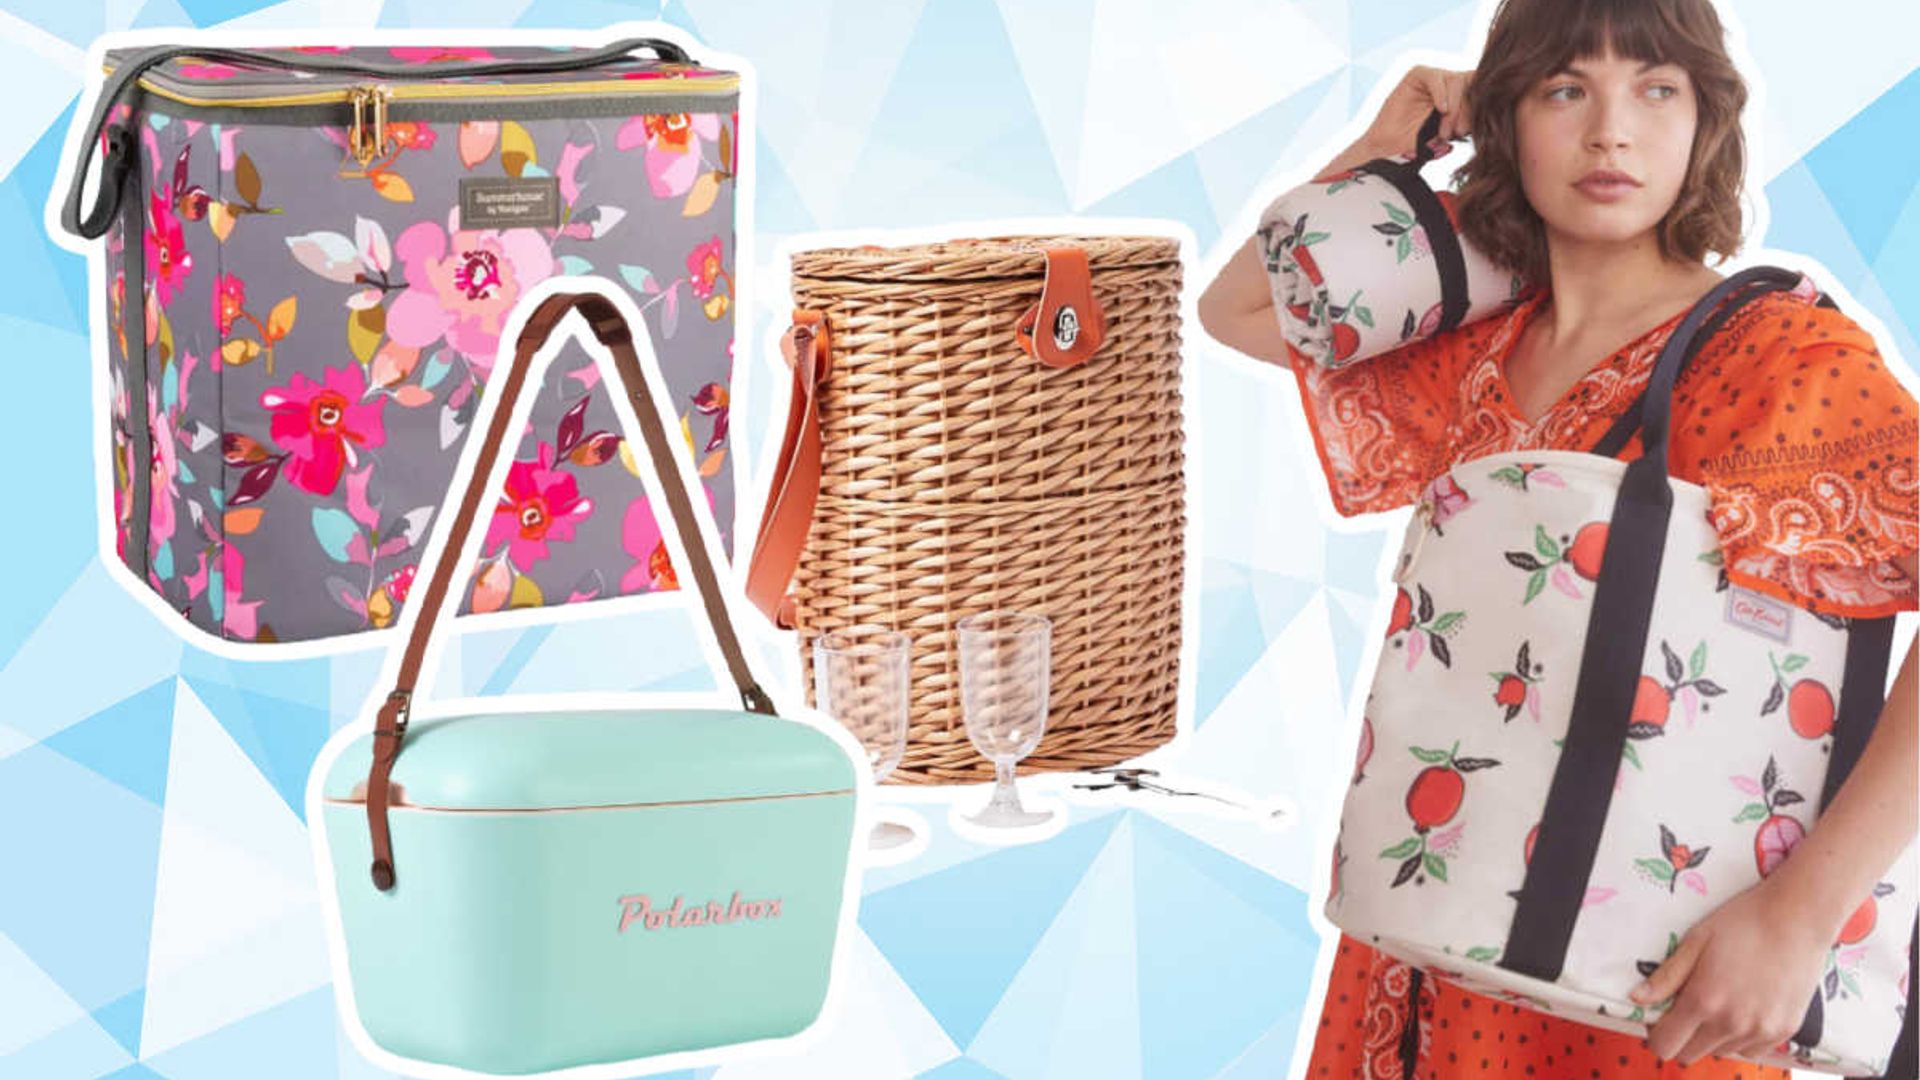 These Stylish Beach Bags Make the Perfect Arm Candy for a Day in